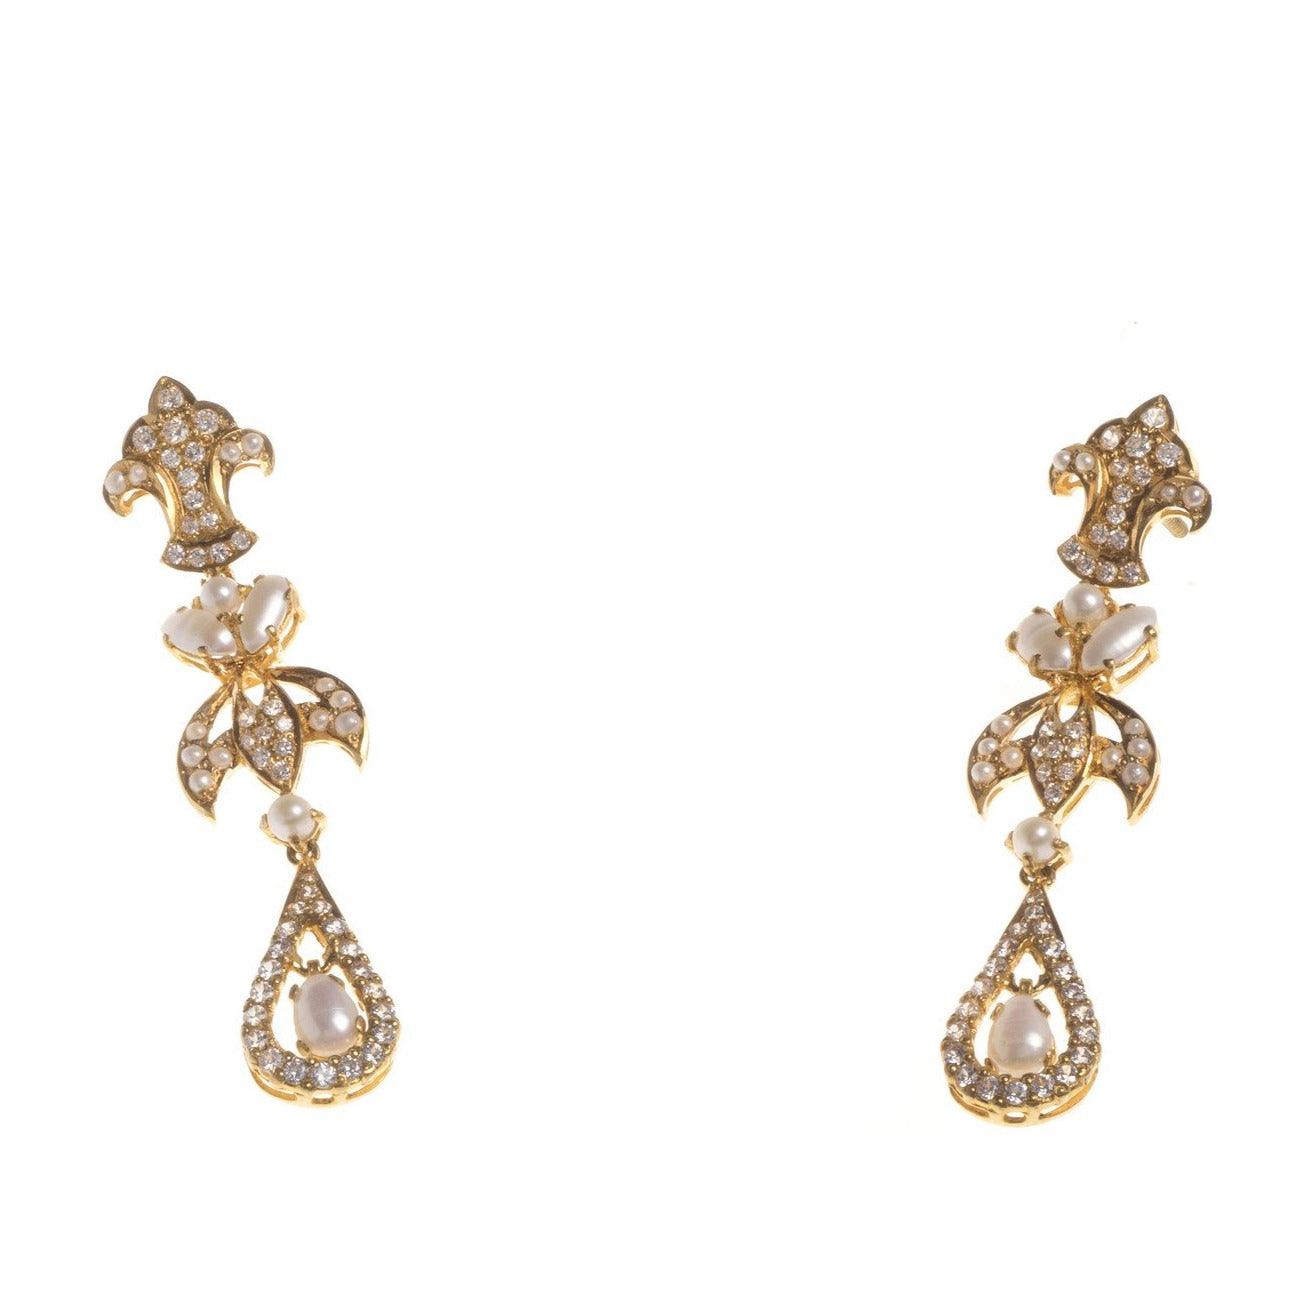 22ct Gold Cubic Zirconia & Cultured Pearl Earrings (15.7g) E-3683 - Minar Jewellers